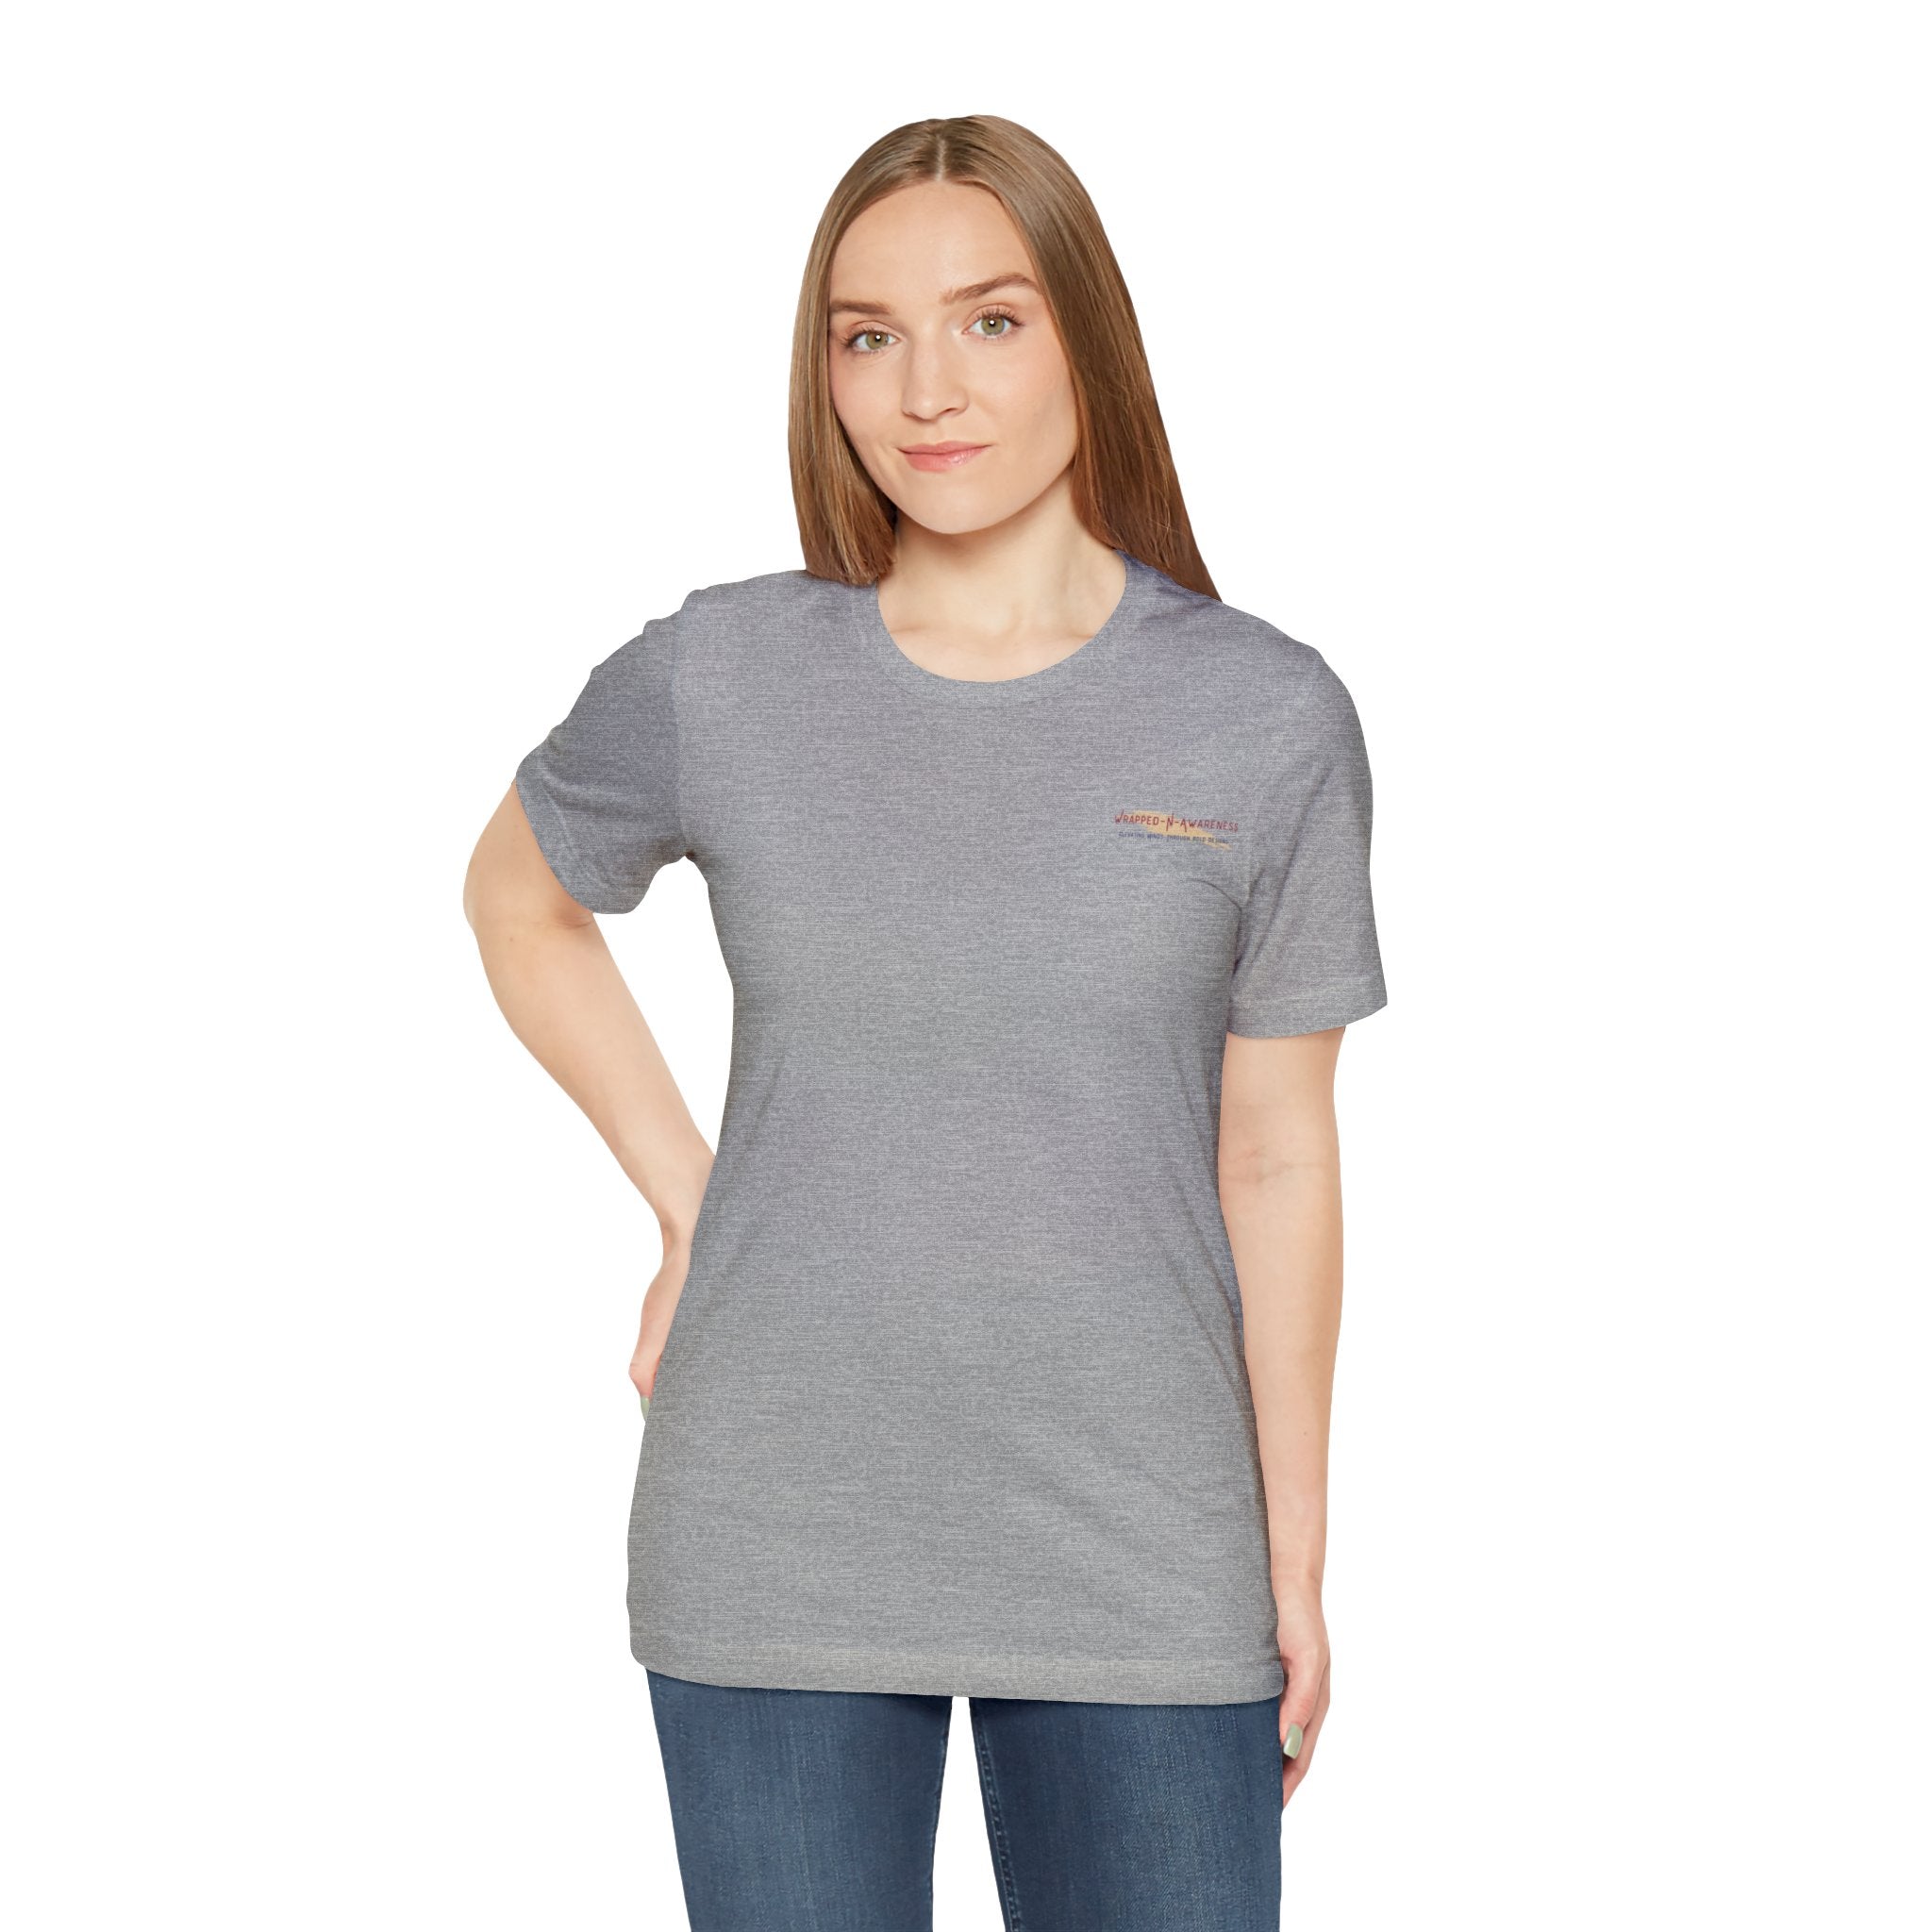 Hope Conquers Fear Jersey Tee - Bella+Canvas 3001 Heather Ice Blue Airlume Cotton Bella+Canvas 3001 Crew Neckline Jersey Short Sleeve Lightweight Fabric Mental Health Support Retail Fit Tear-away Label Tee Unisex Tee T-Shirt 271074895455097432_2048 Printify